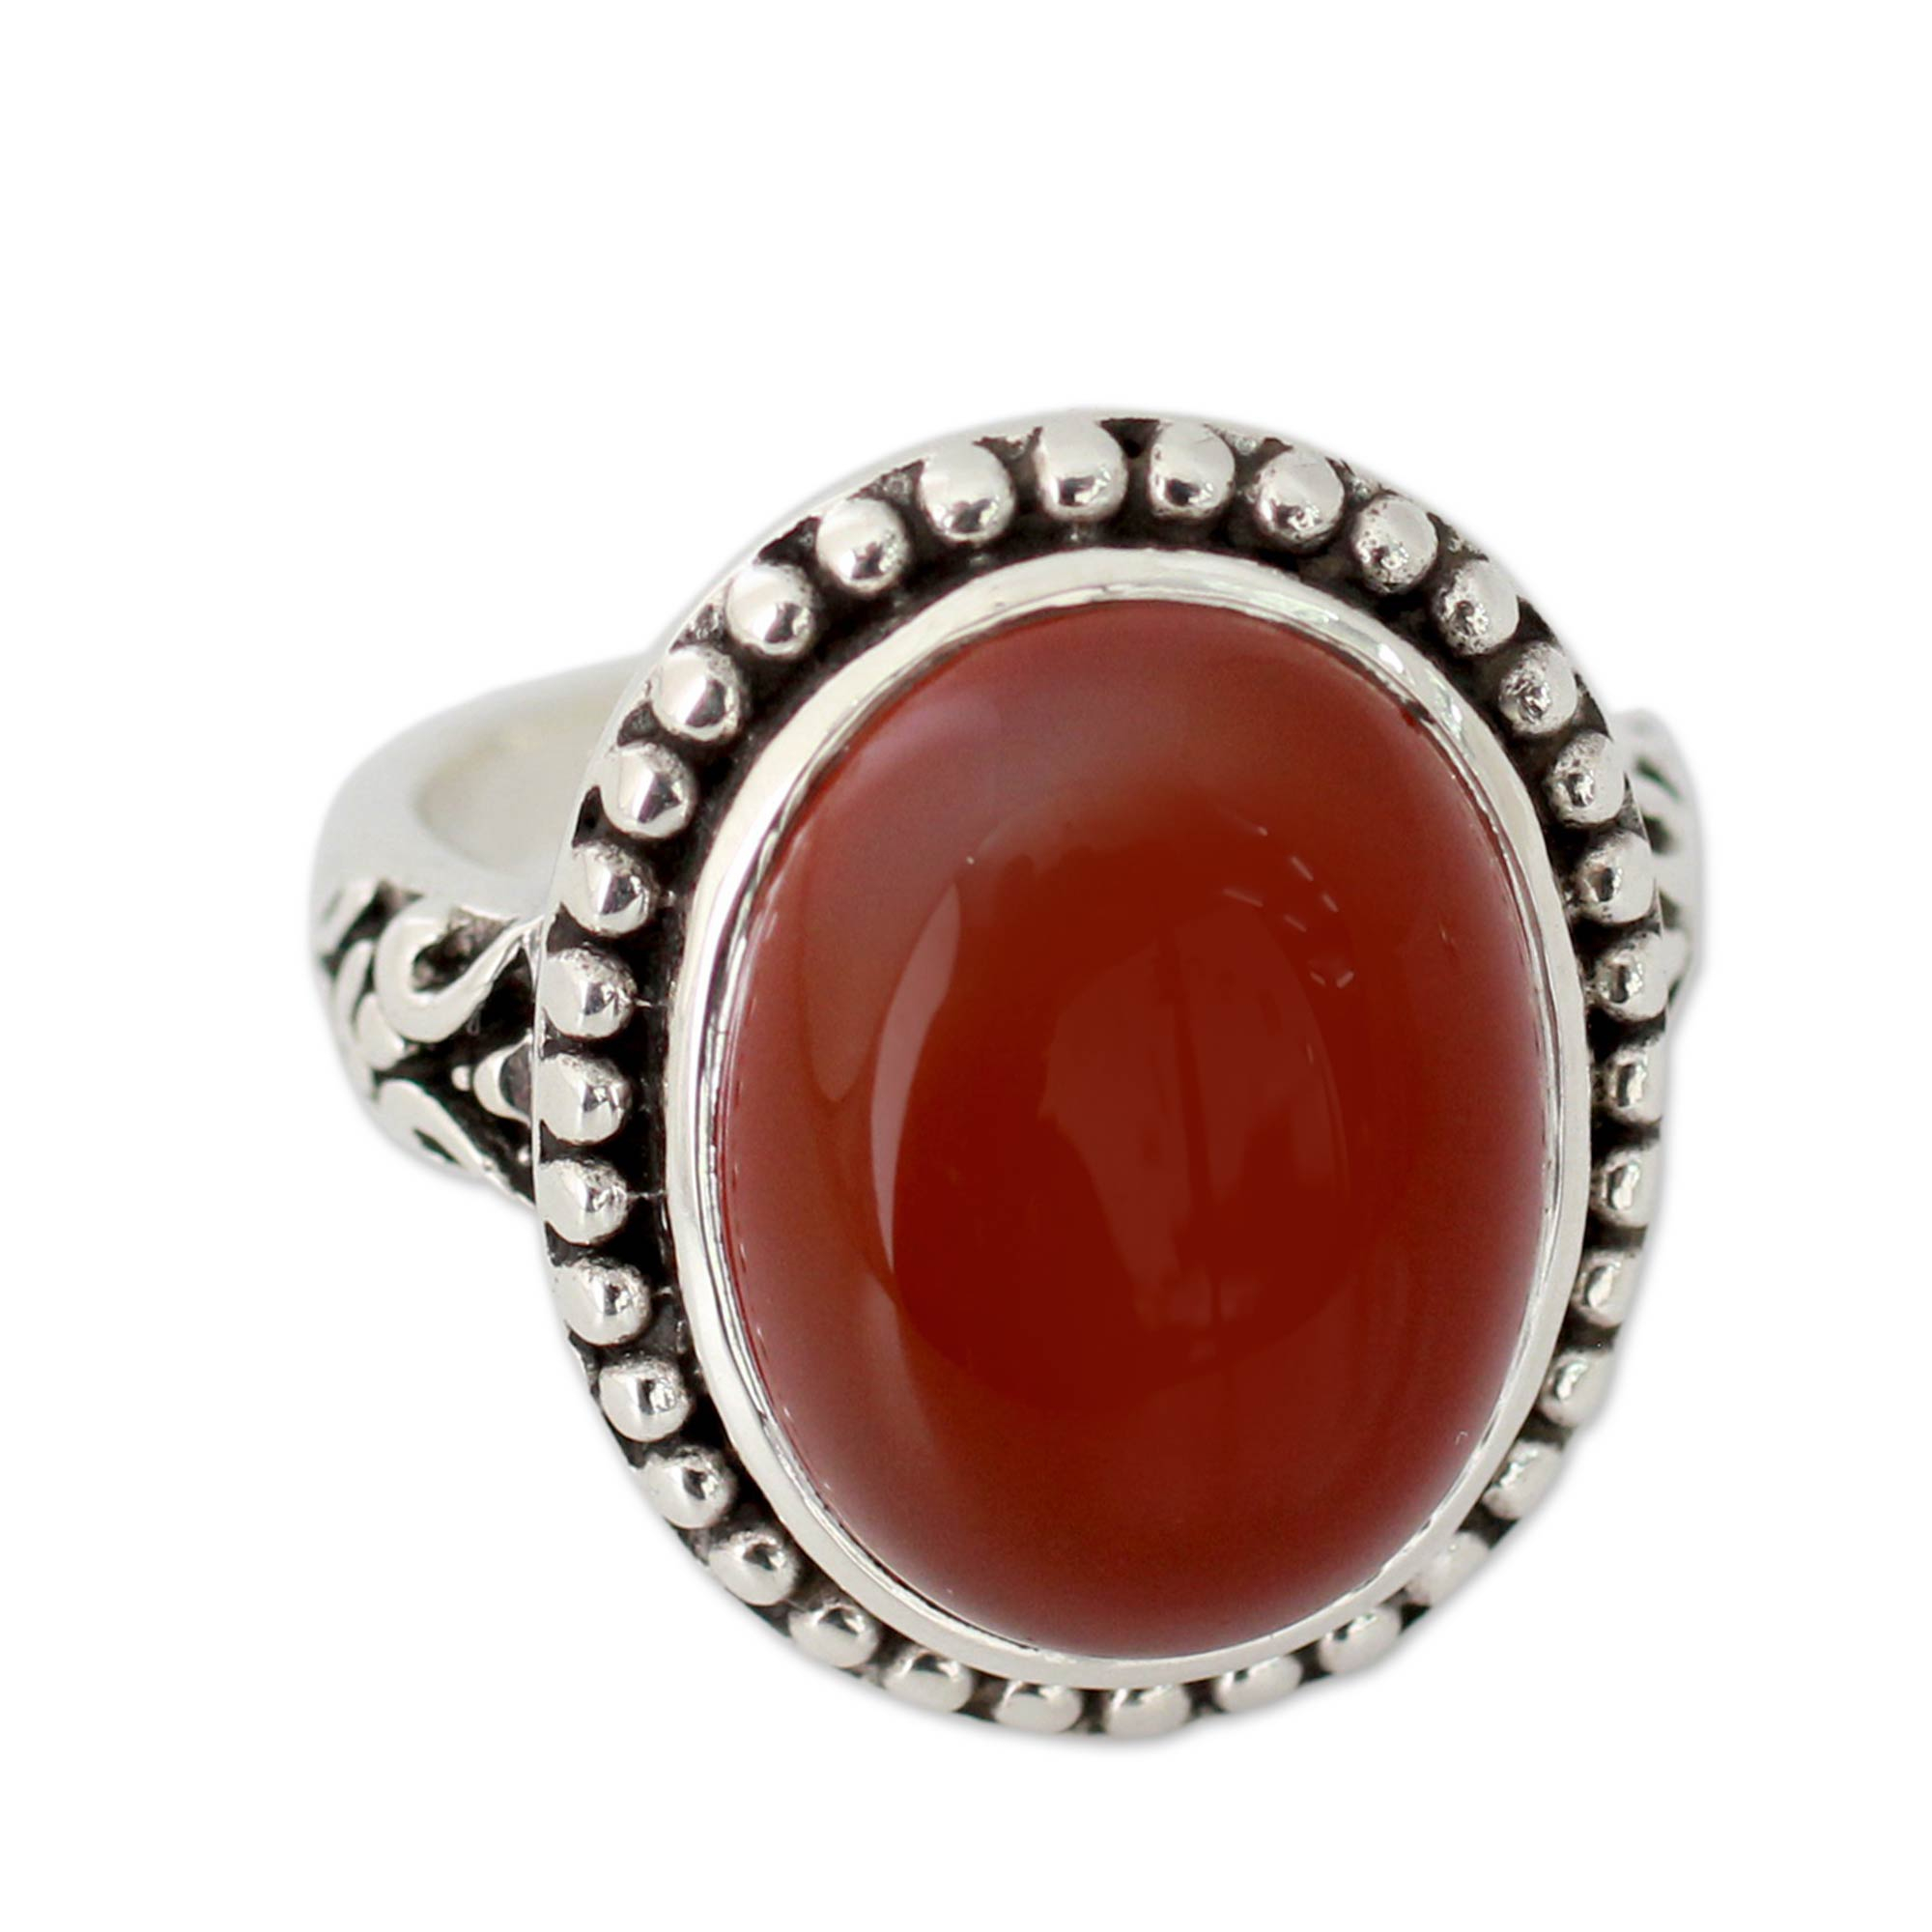 Enhanced Red Onyx and Sterling Silver Cocktail Ring - Glowing Sunset ...